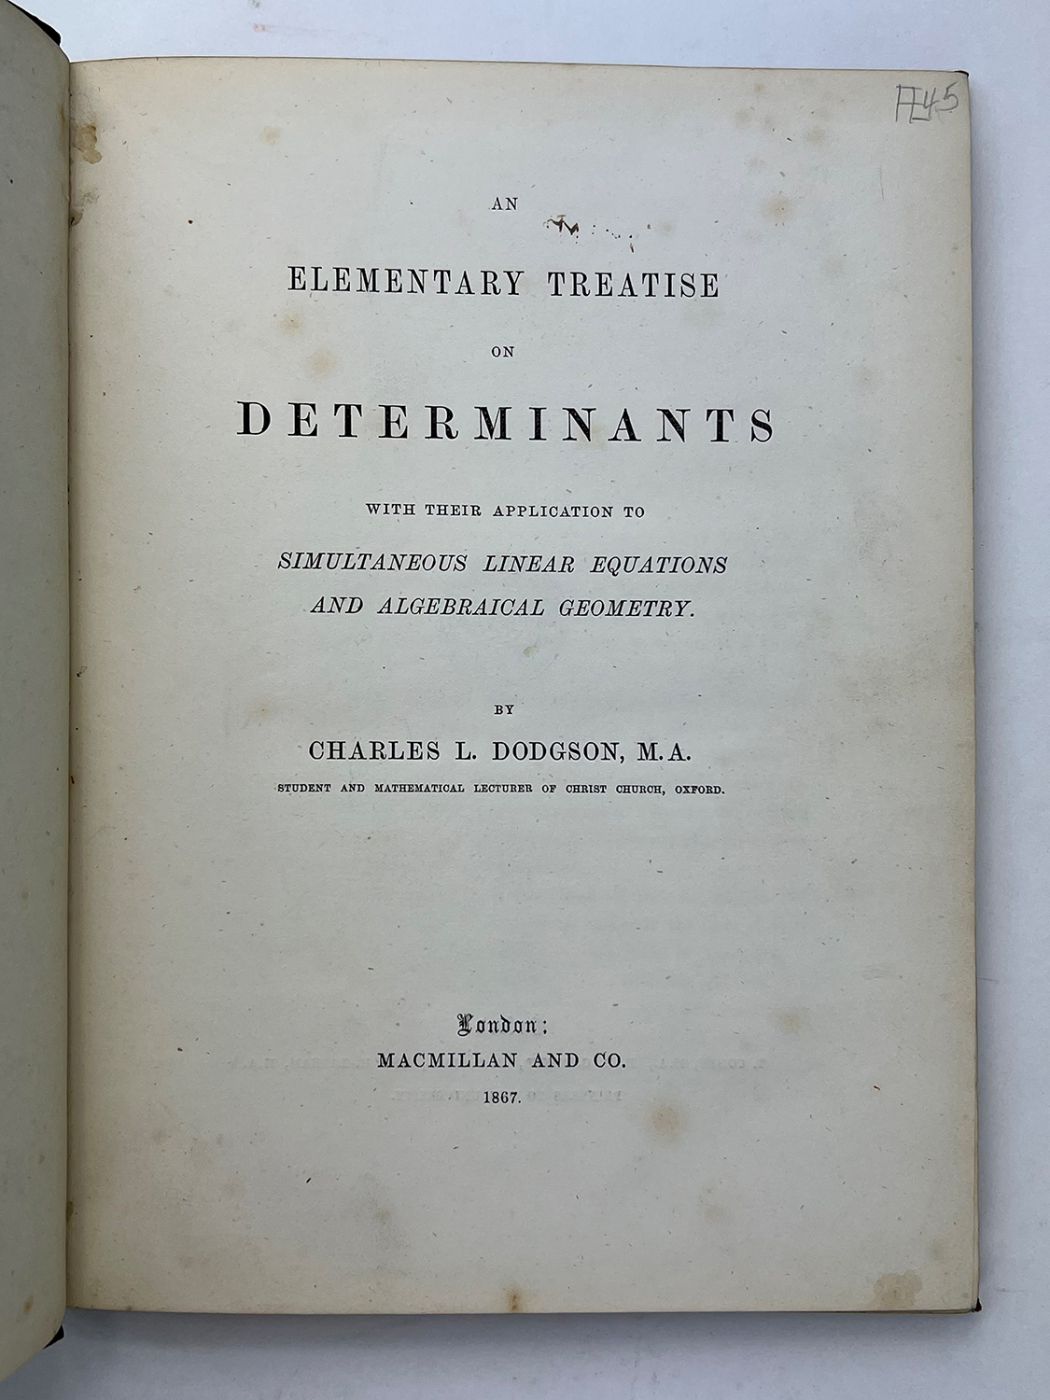 AN ELEMENTARY TREATISE ON DETERMINANTS, WITH THEIR APPLICATION TO SIMULTANEOUS LINEAR EQUATIONS AND ALGEBRAICAL GEOMETRY -  image 4